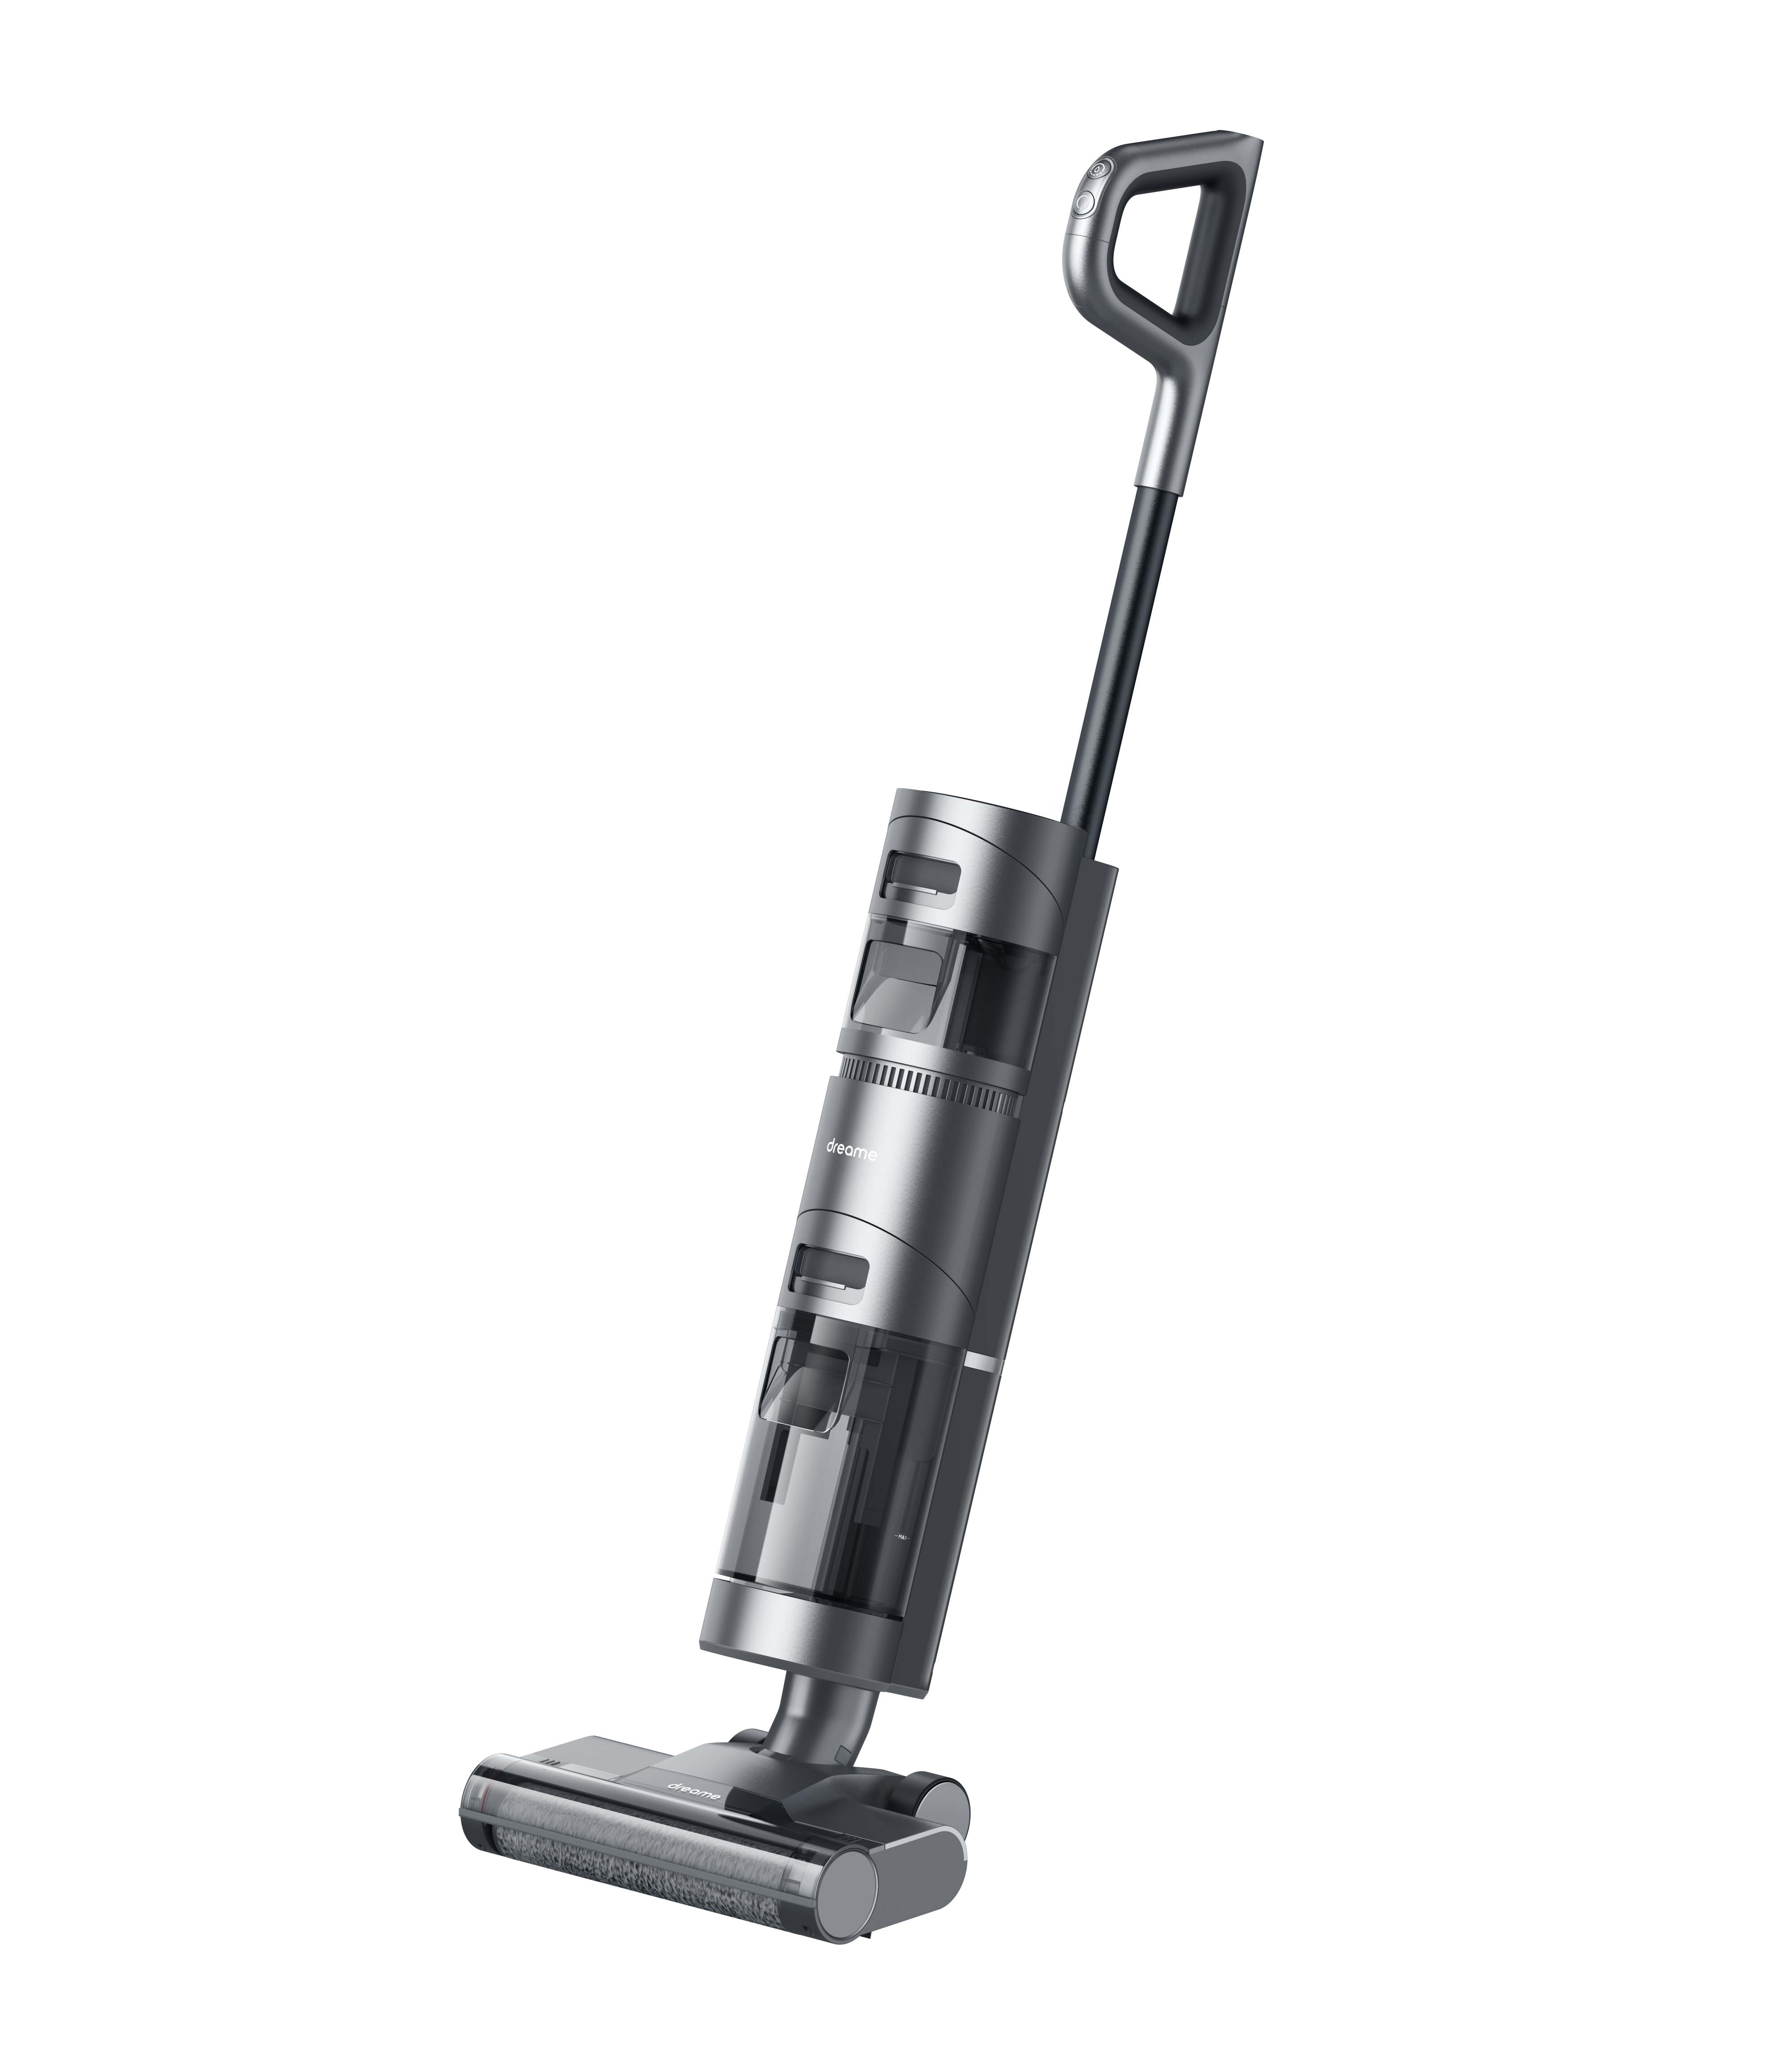 Dreame H11 Max Wet and Dry Vacuum, black